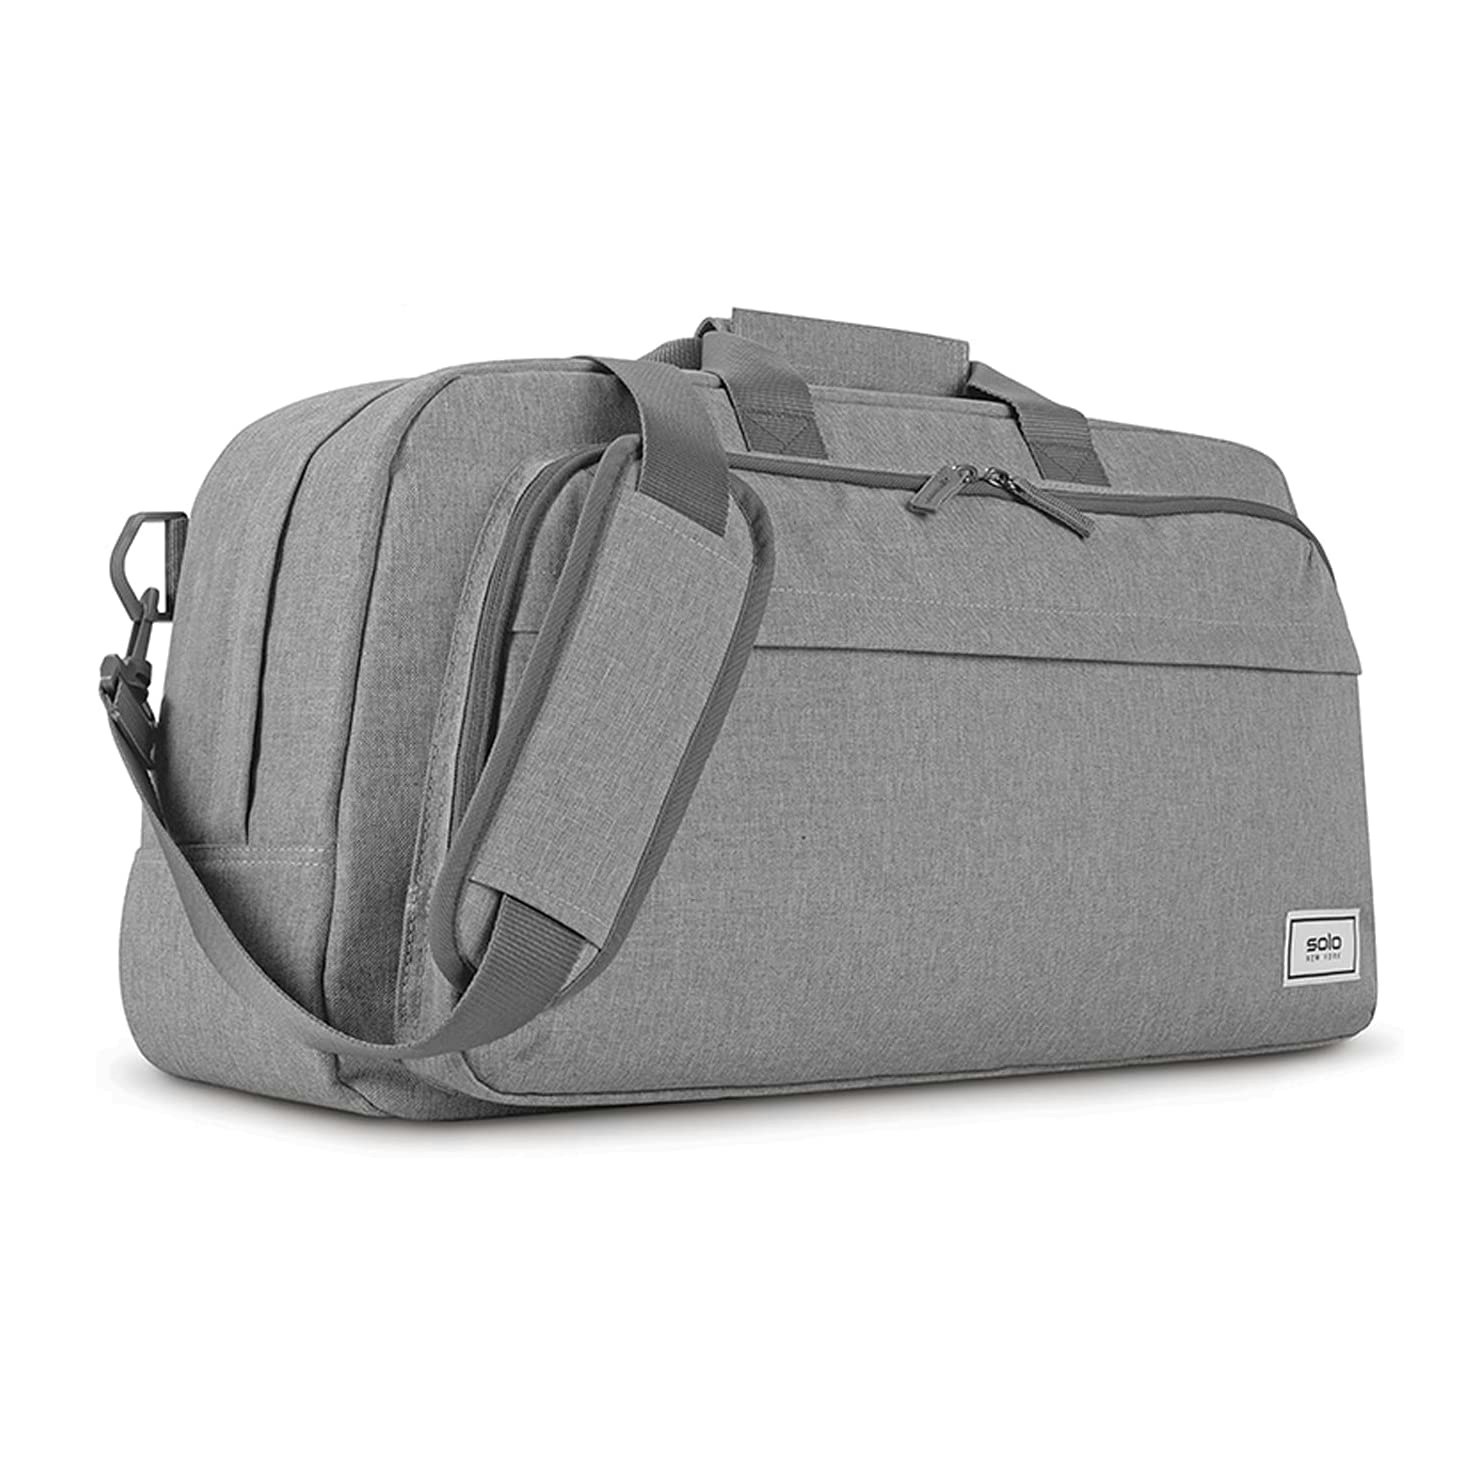 The grey Re:move duffle bag from Soho New York